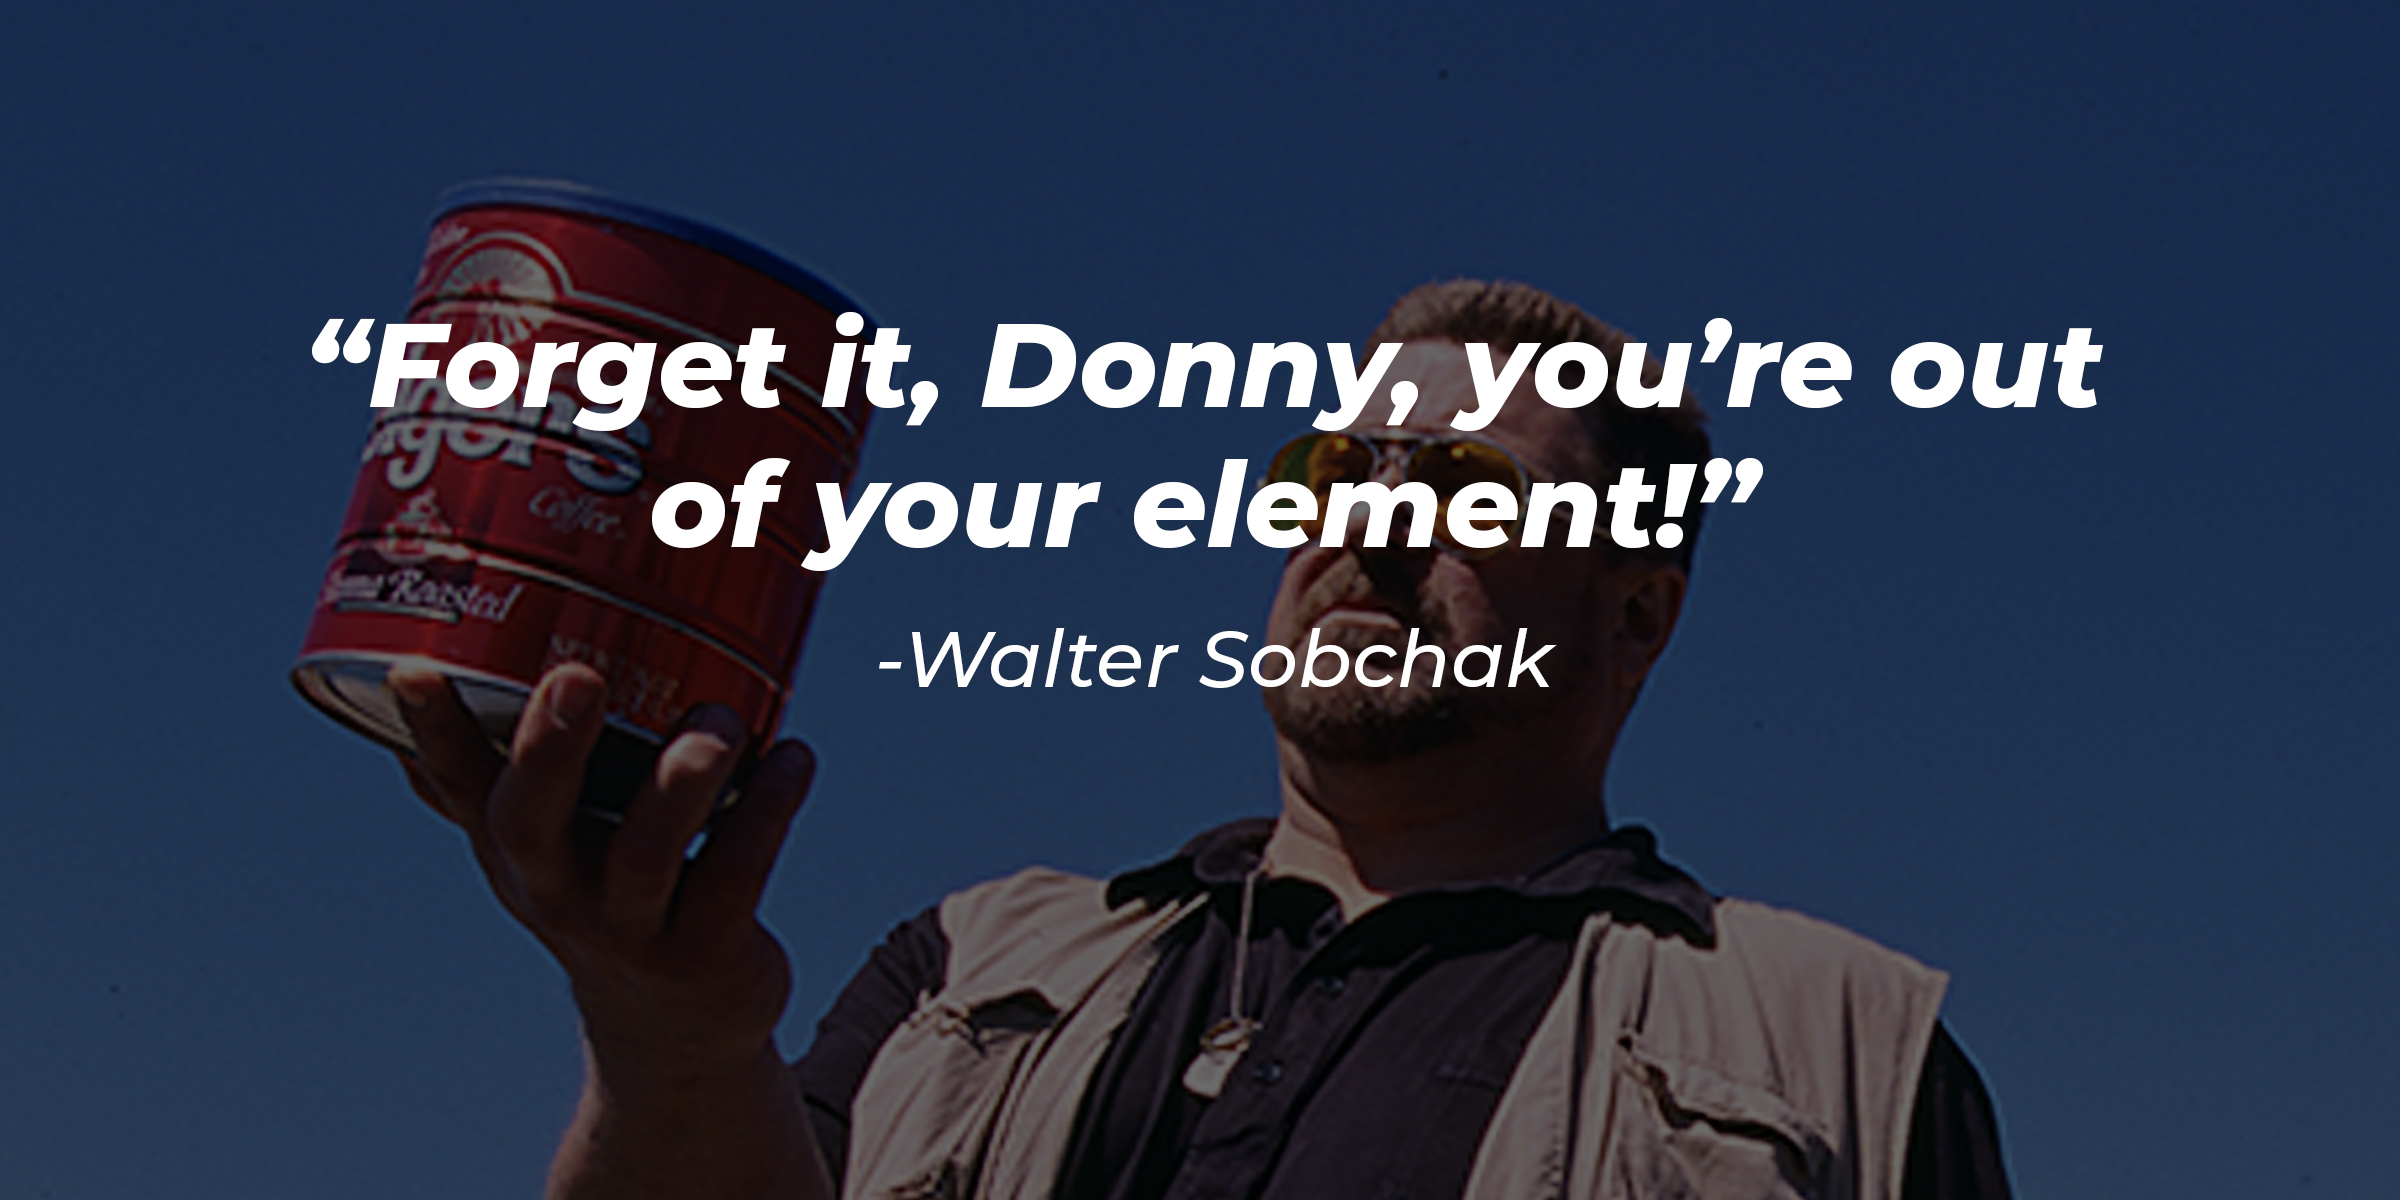 Walter Sobchak, with his quote: “Forget it, Donny, you’re out of your element!” | Source: Facebook.com/JeffTheDudeLebowski